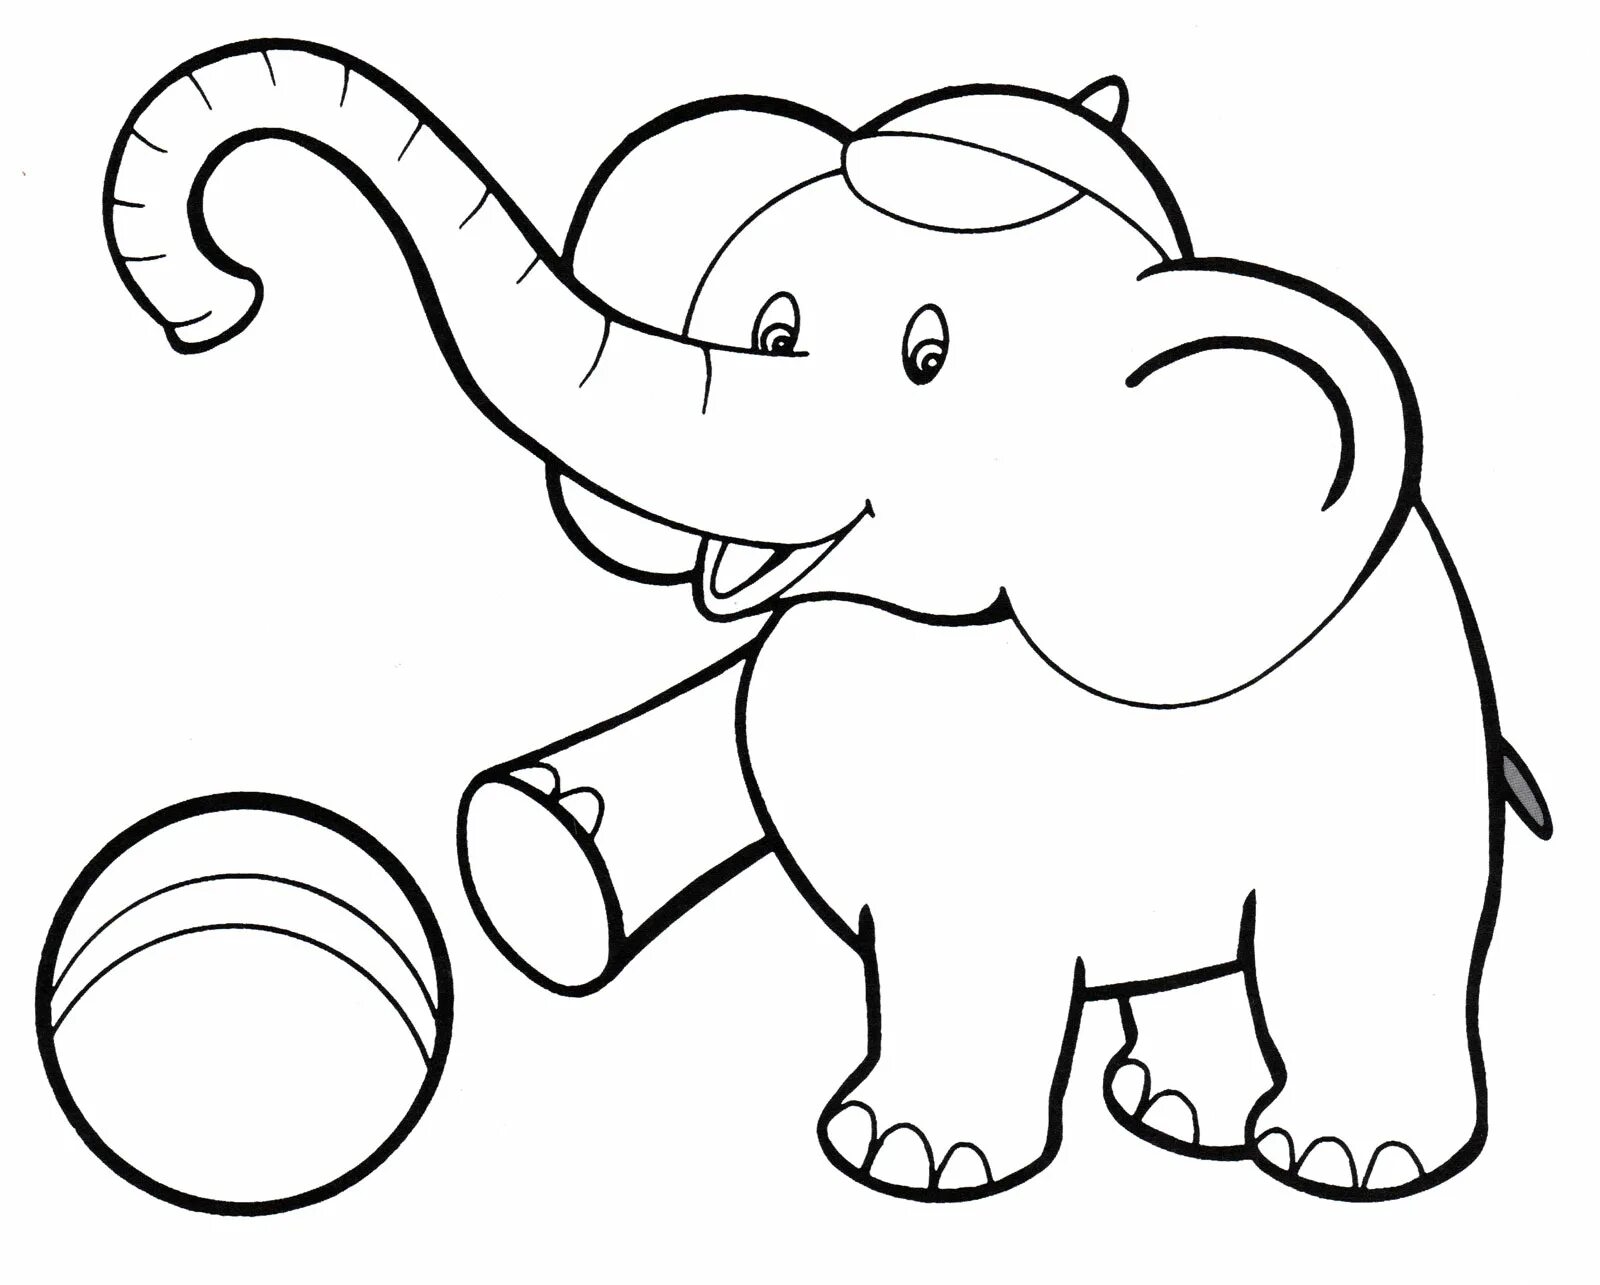 Colorful elephant coloring game